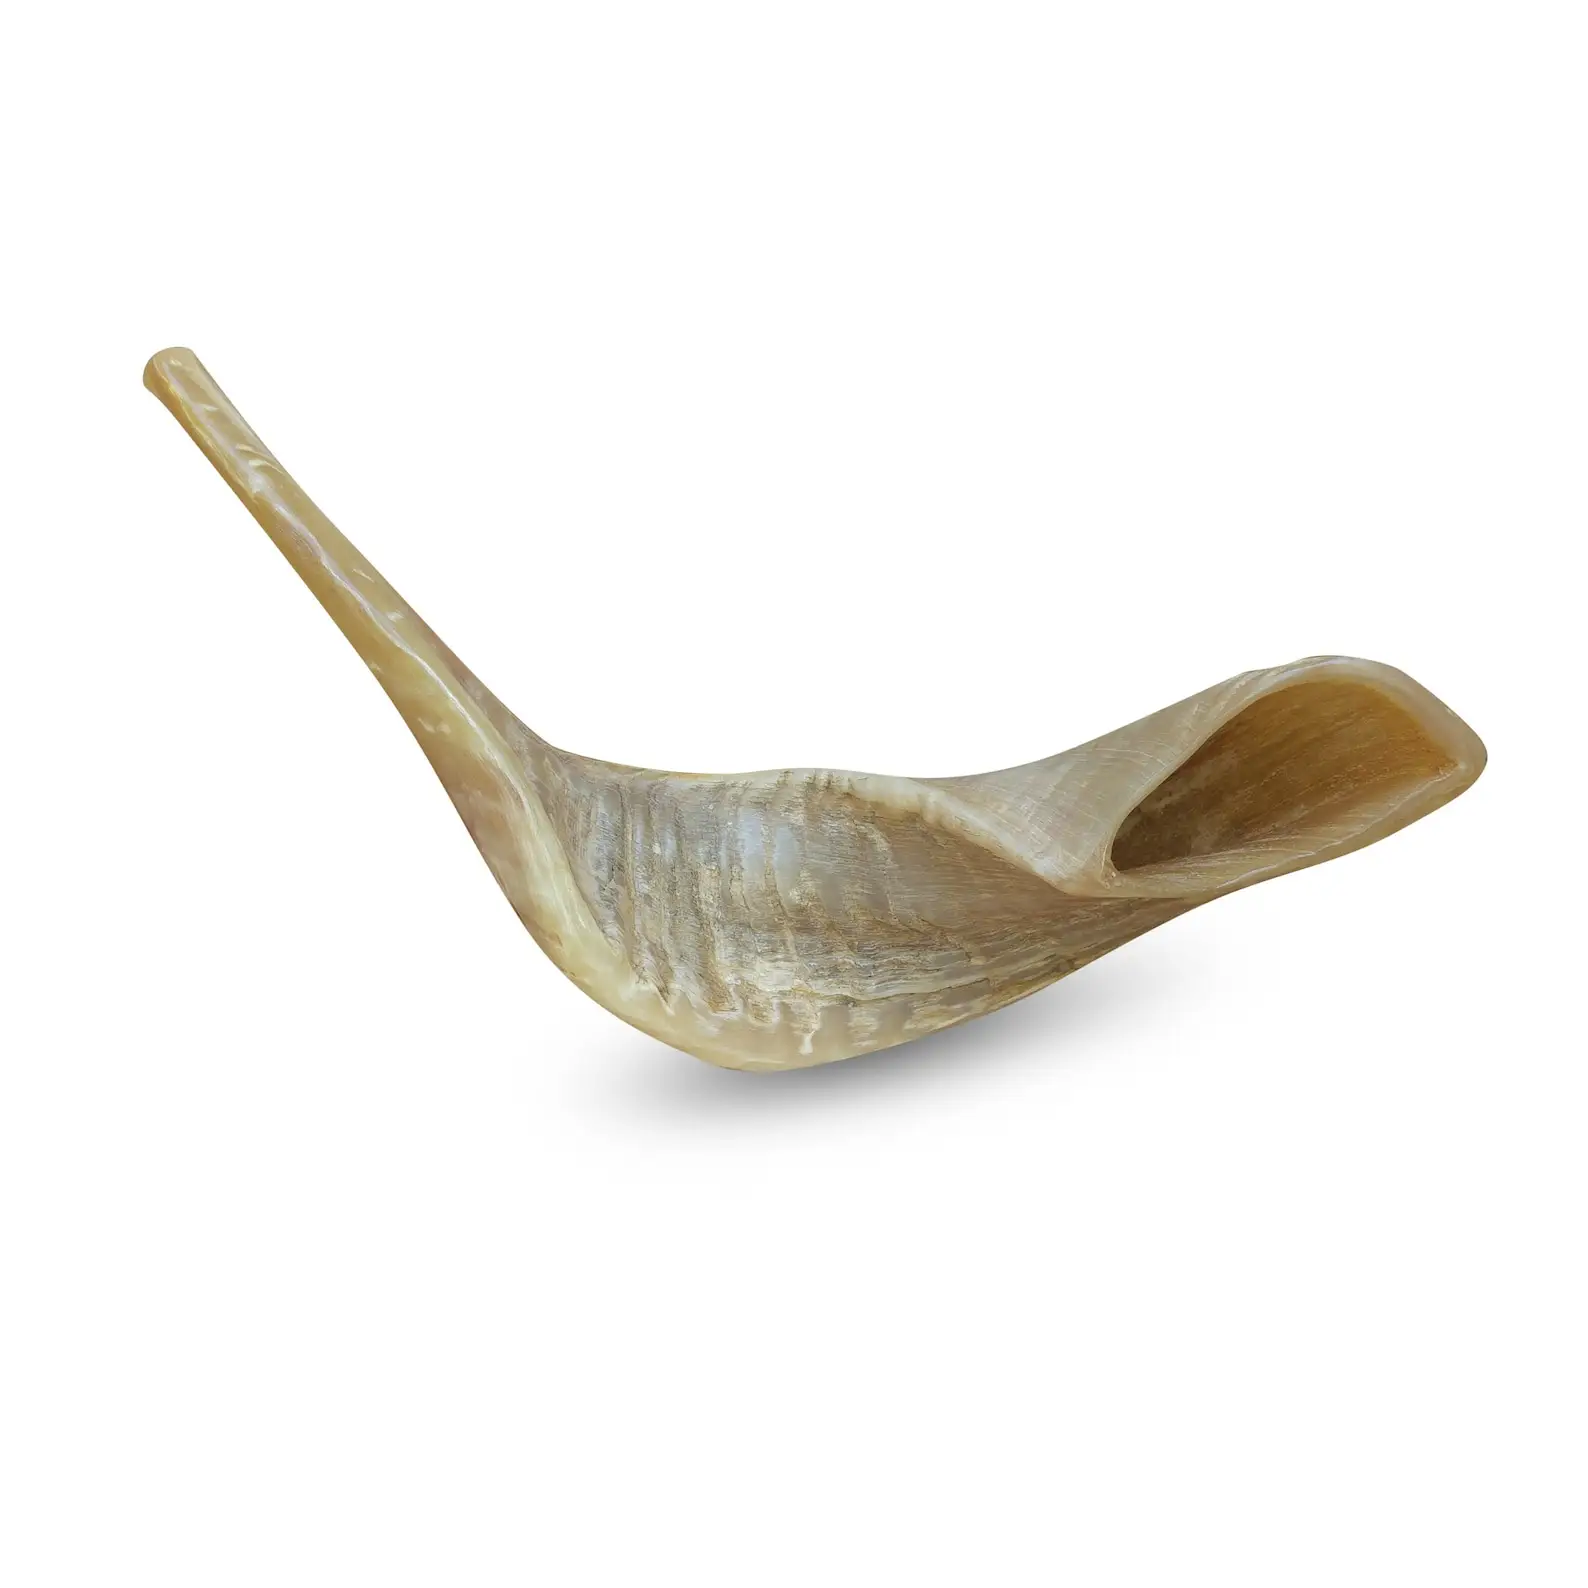 Ram Shofar Horn for Blowing with Exciting Offer Shofar / Kudu / Ram Horn / Polished Crystals Healing Stones Hot Selling Natural